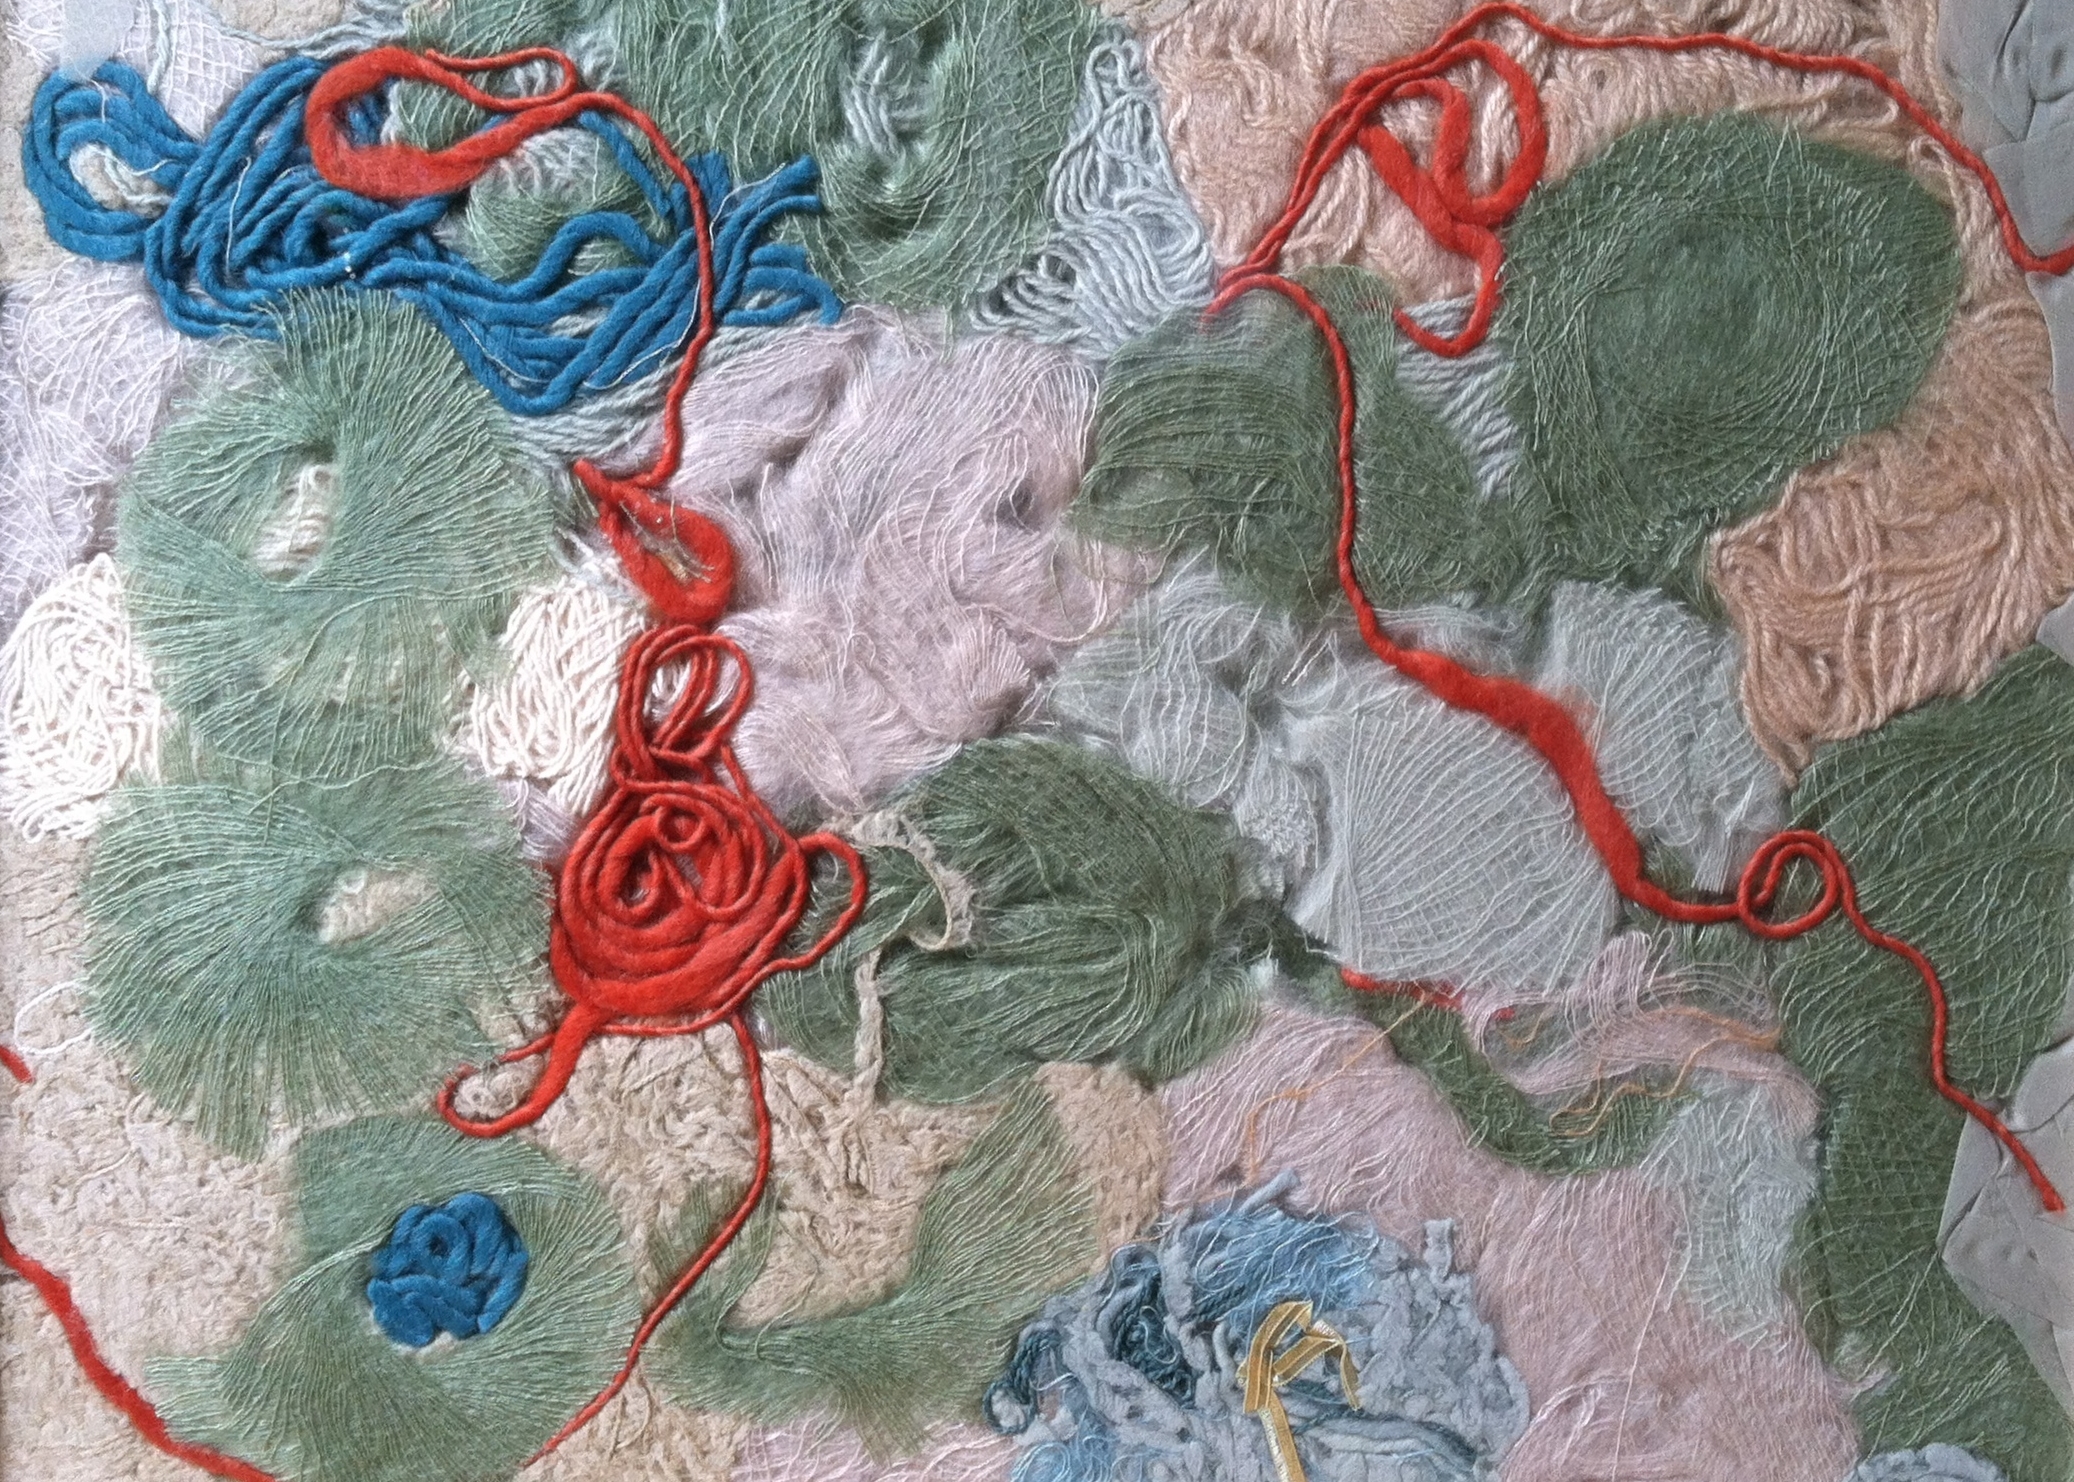 Aerial Perspective 1.0 2014 Wool, cotton, and silk 18" x 24" Collection of Natalie and Jon Meir